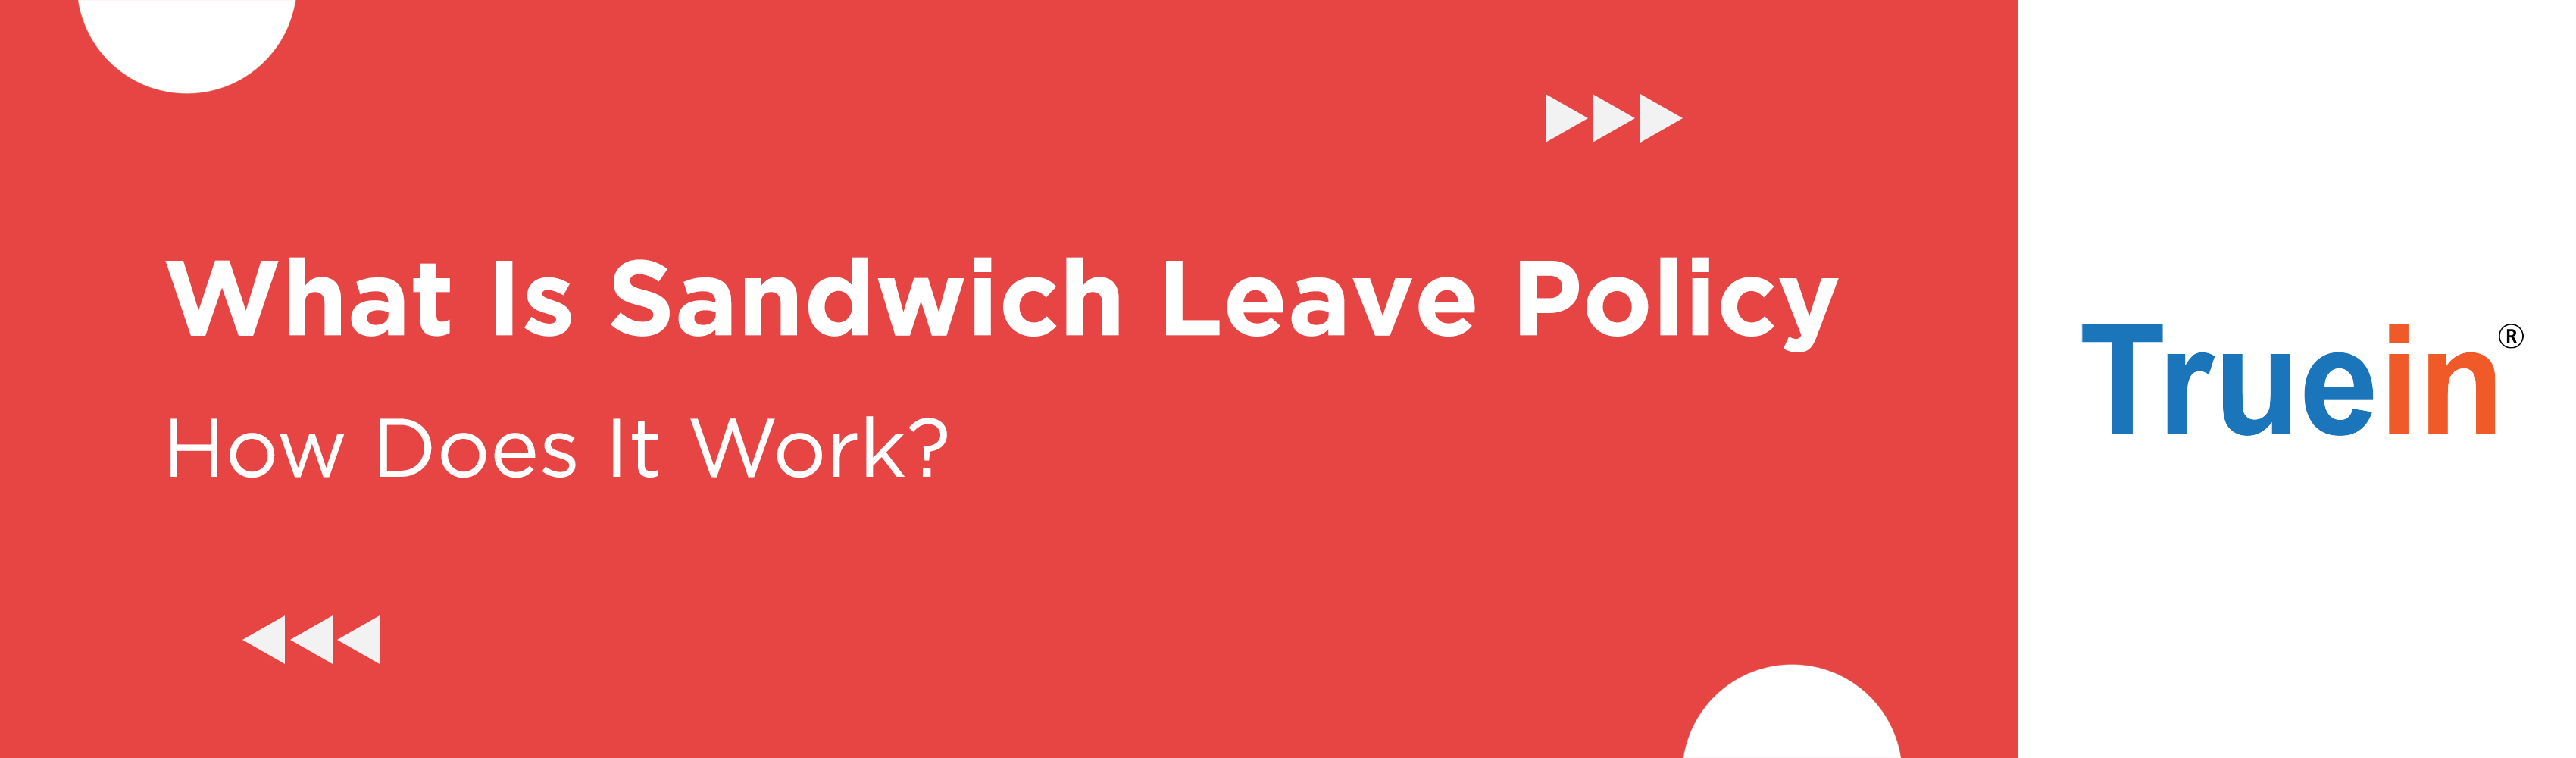 What Is Sandwich Leave Policy and How Does It Work?